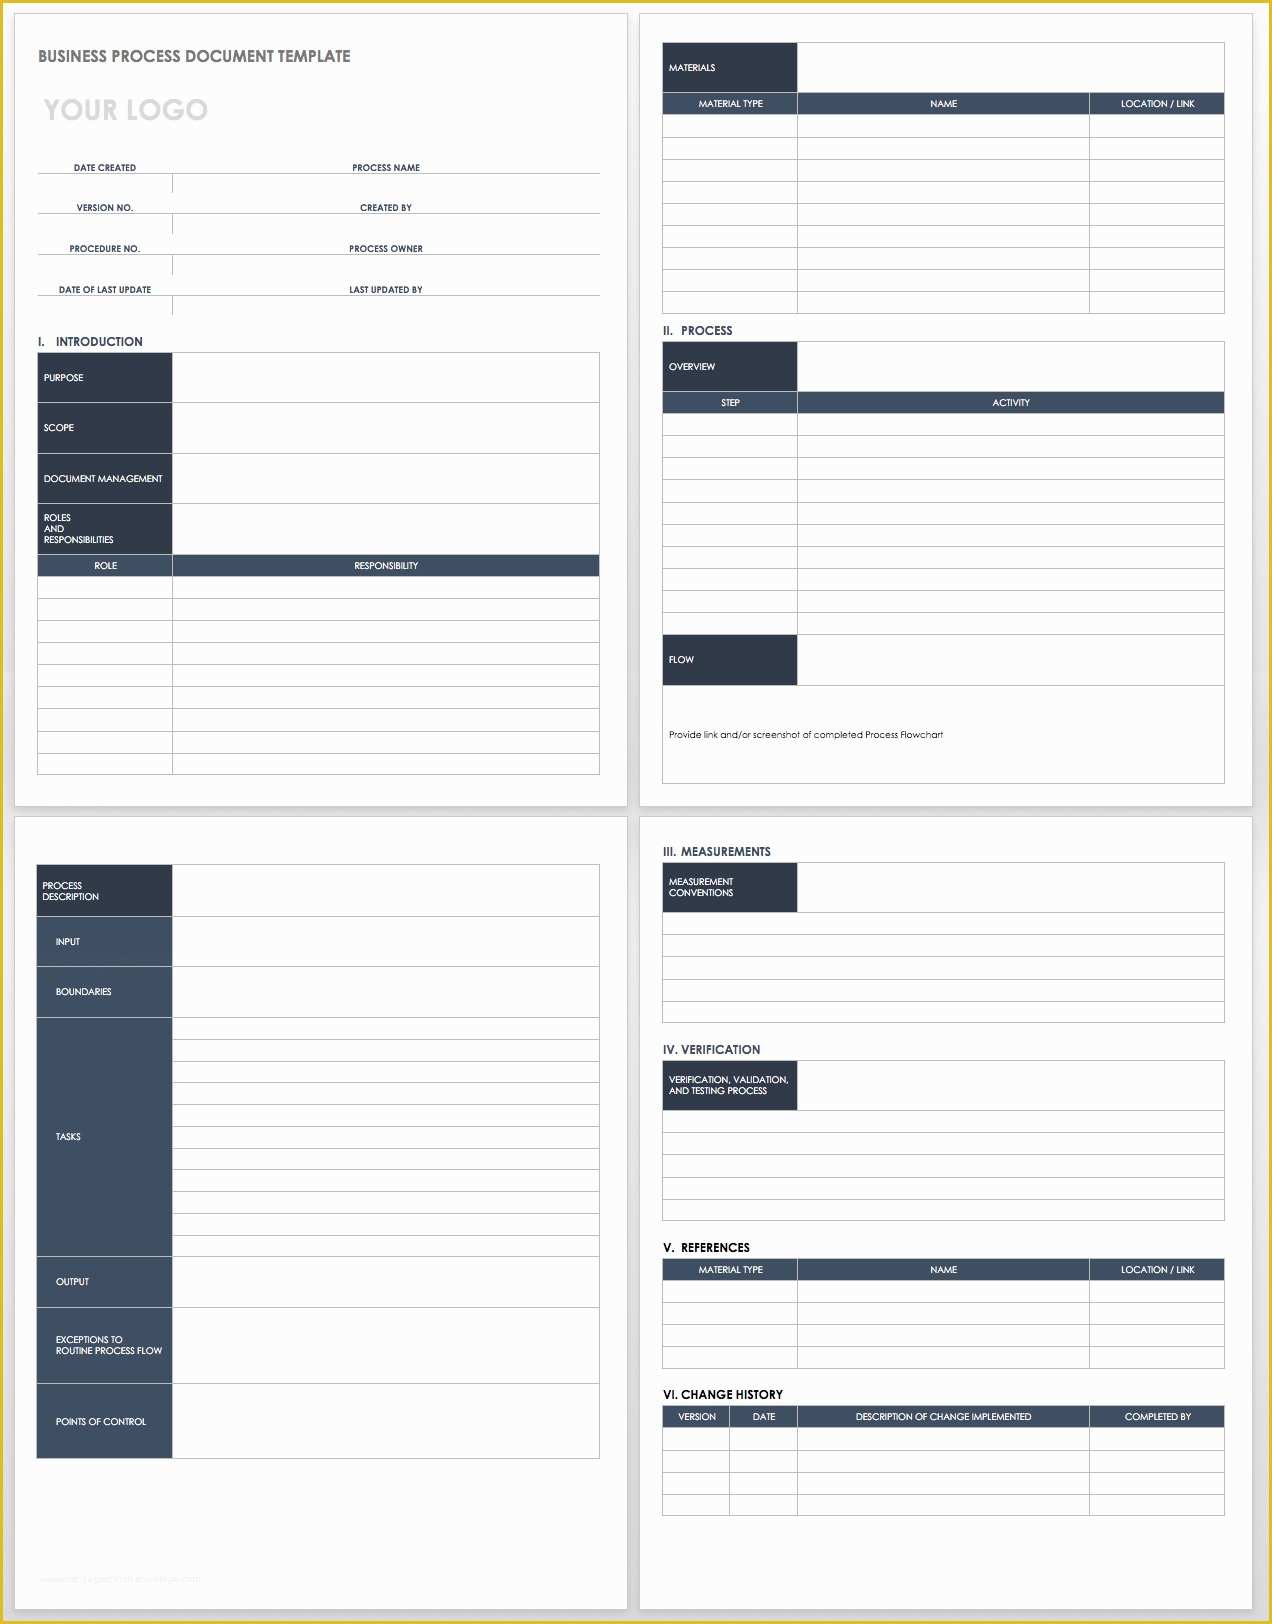 Free Business Process Documentation Template Of Free Process Document Templates